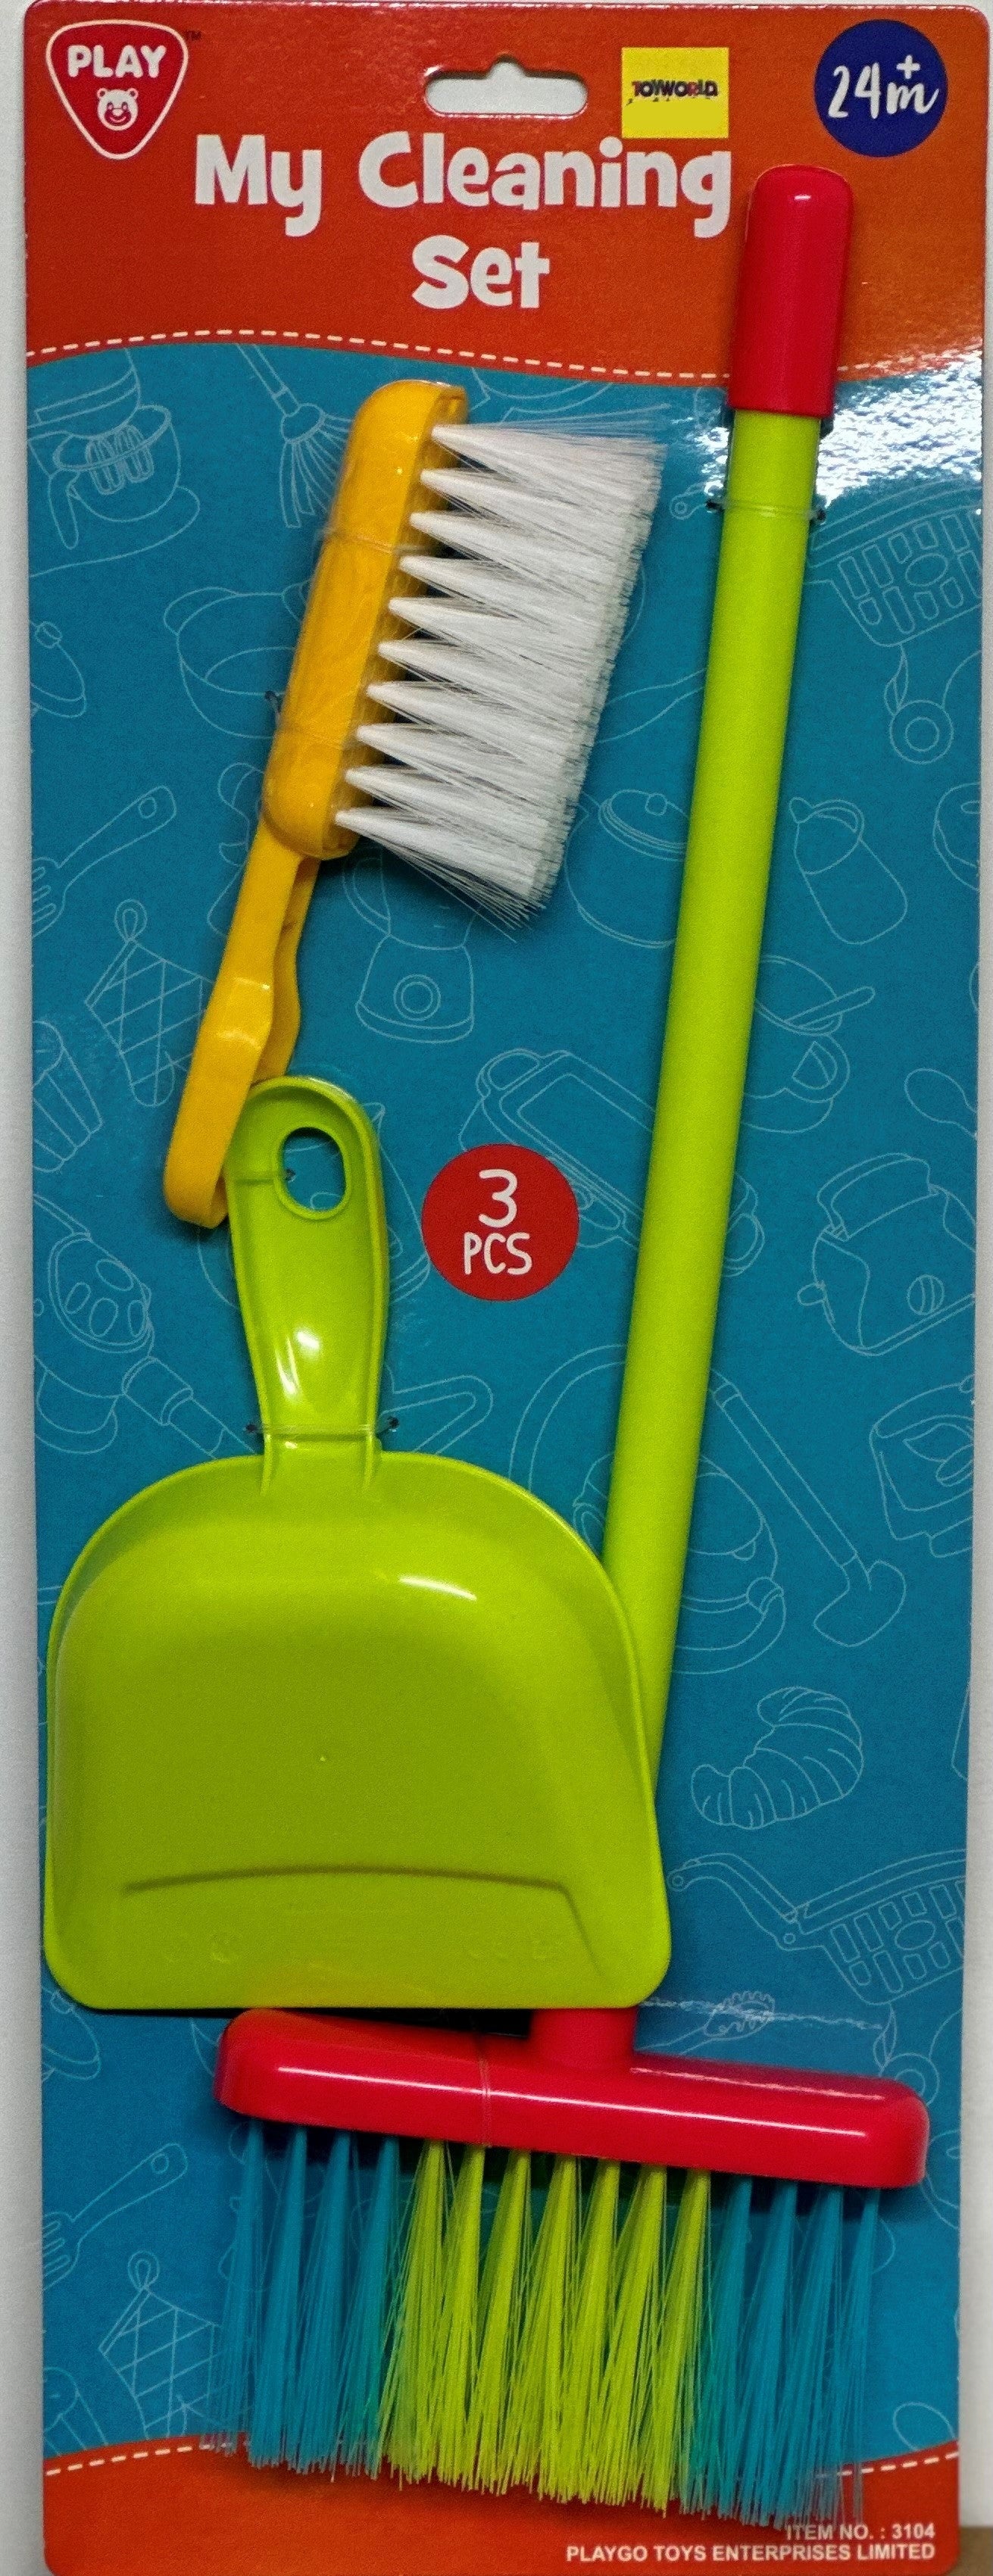 PLAYGO TOYS ENT. LTD.  My Cleaning Set 3pce